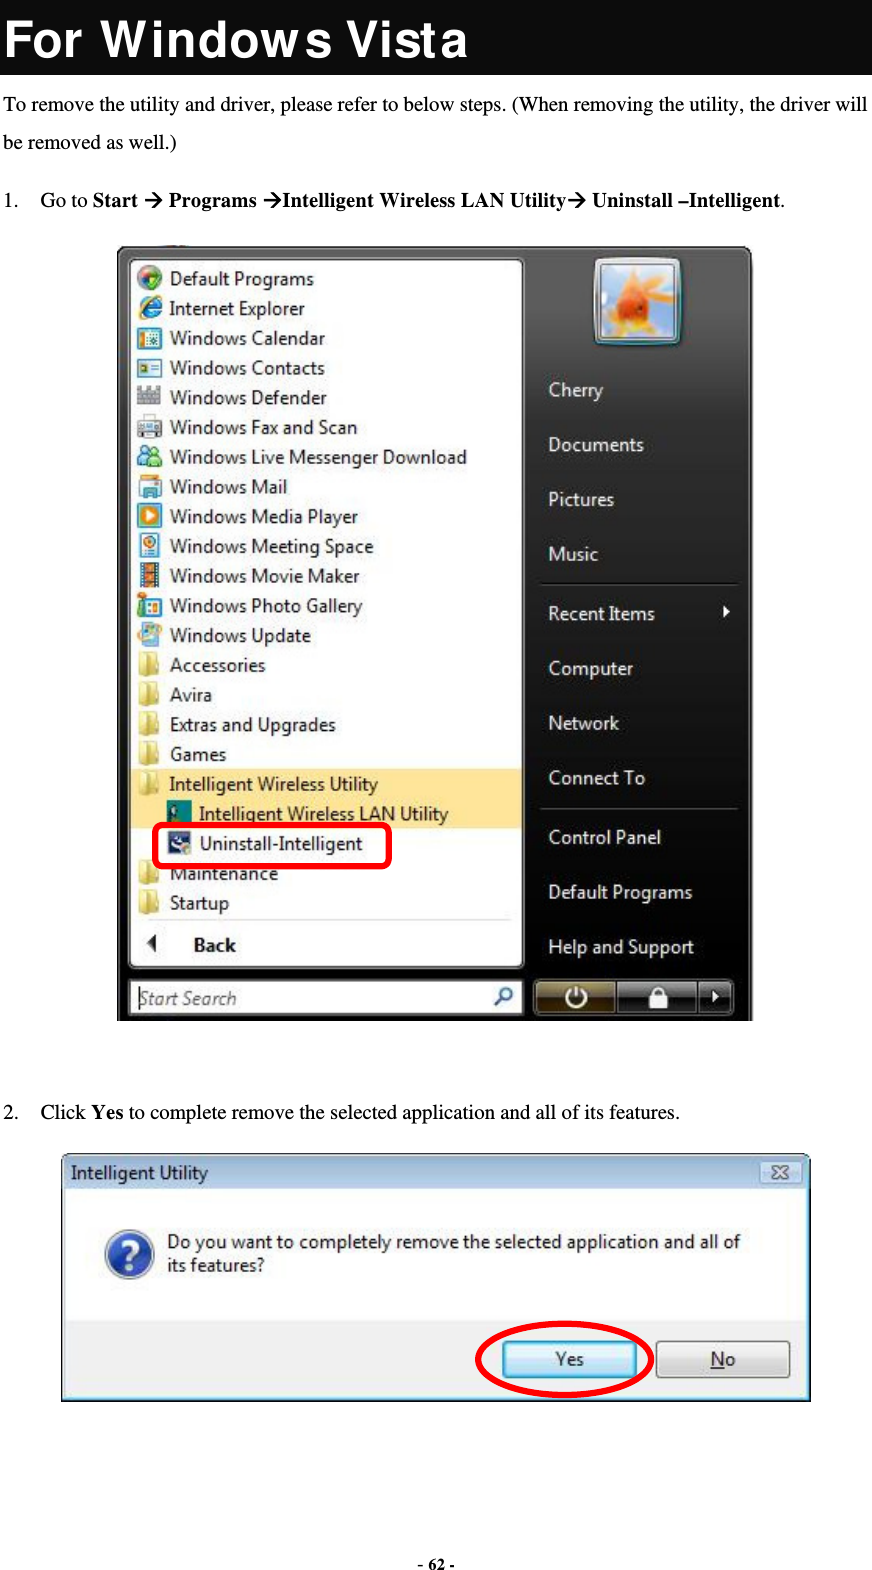  - 62 - For Windows Vista To remove the utility and driver, please refer to below steps. (When removing the utility, the driver will be removed as well.) 1. Go to Start  Programs Intelligent Wireless LAN Utility Uninstall –Intelligent.   2. Click Yes to complete remove the selected application and all of its features.   